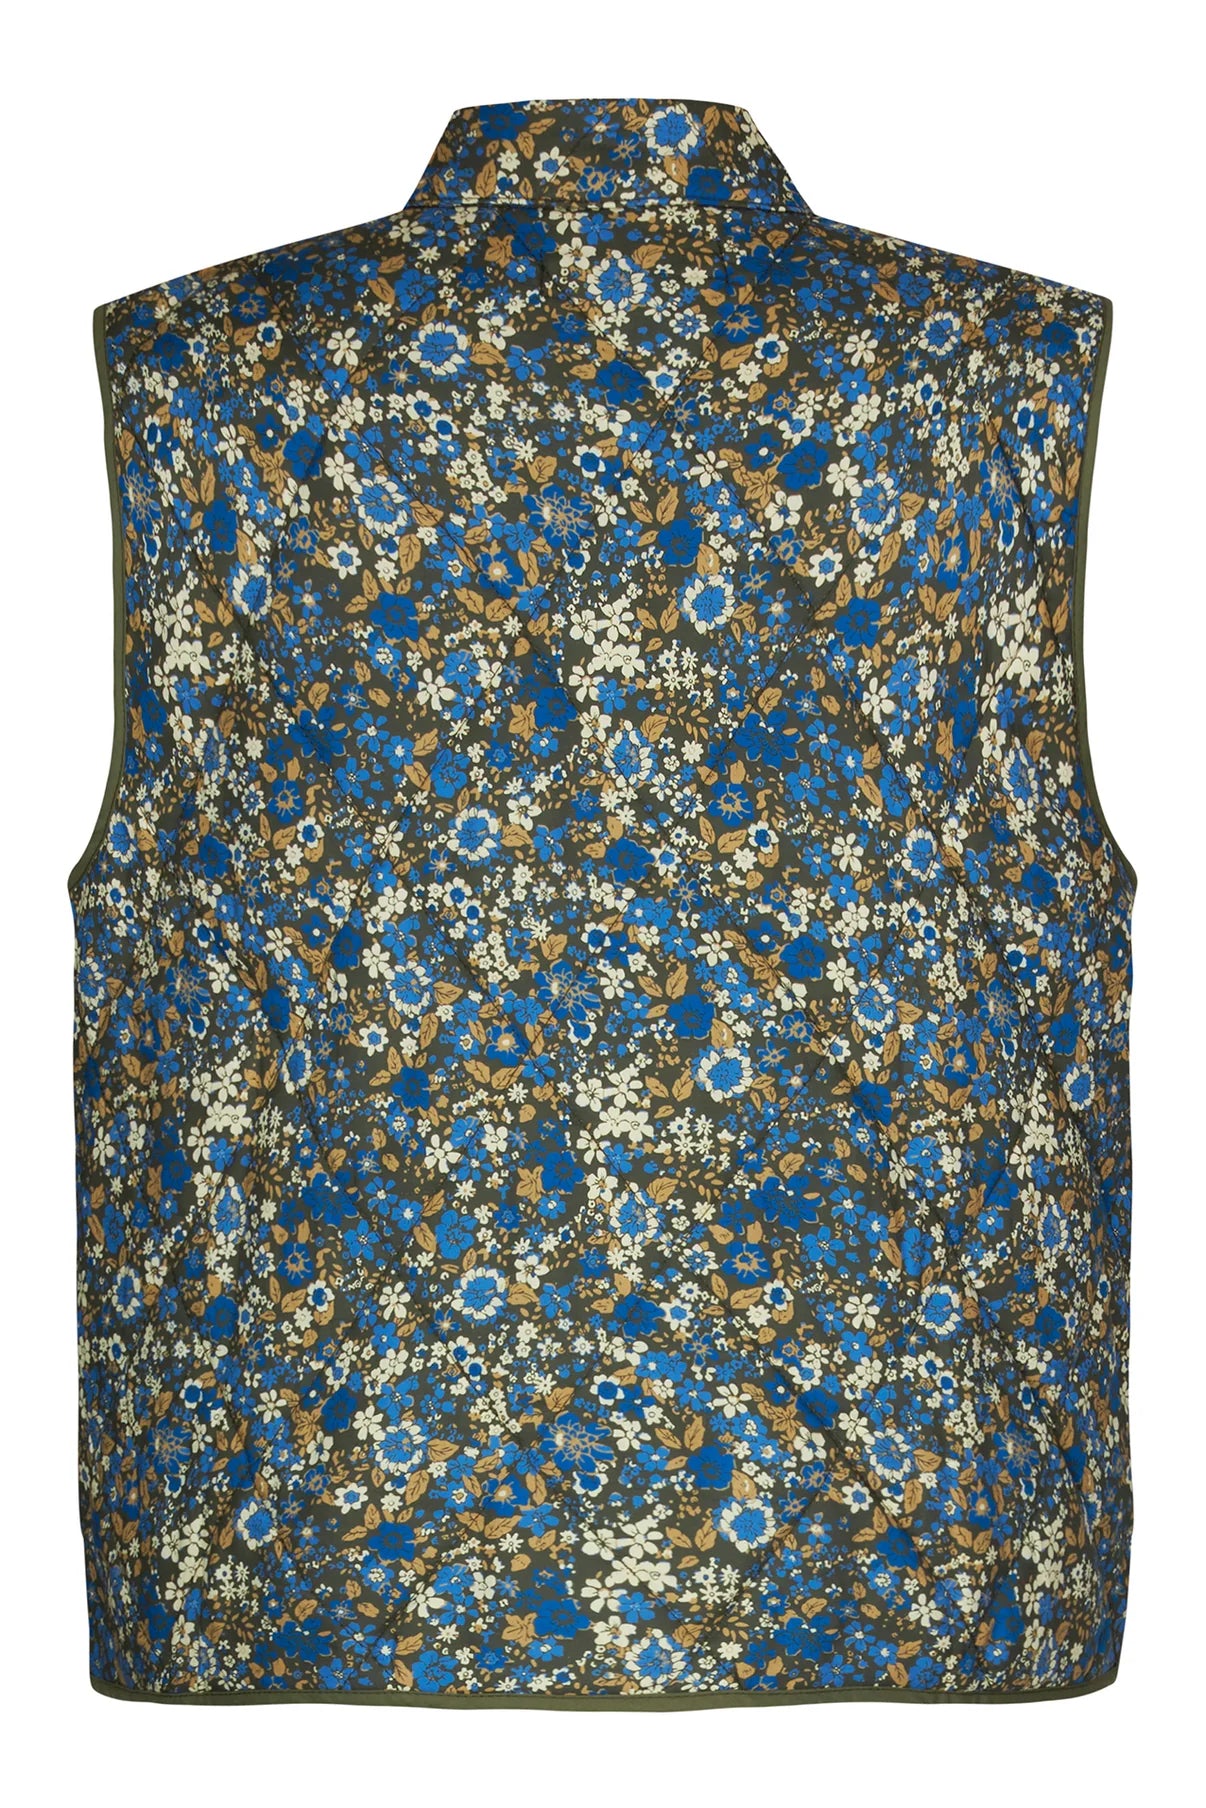 CAIRO QUILTED VEST - BLUE